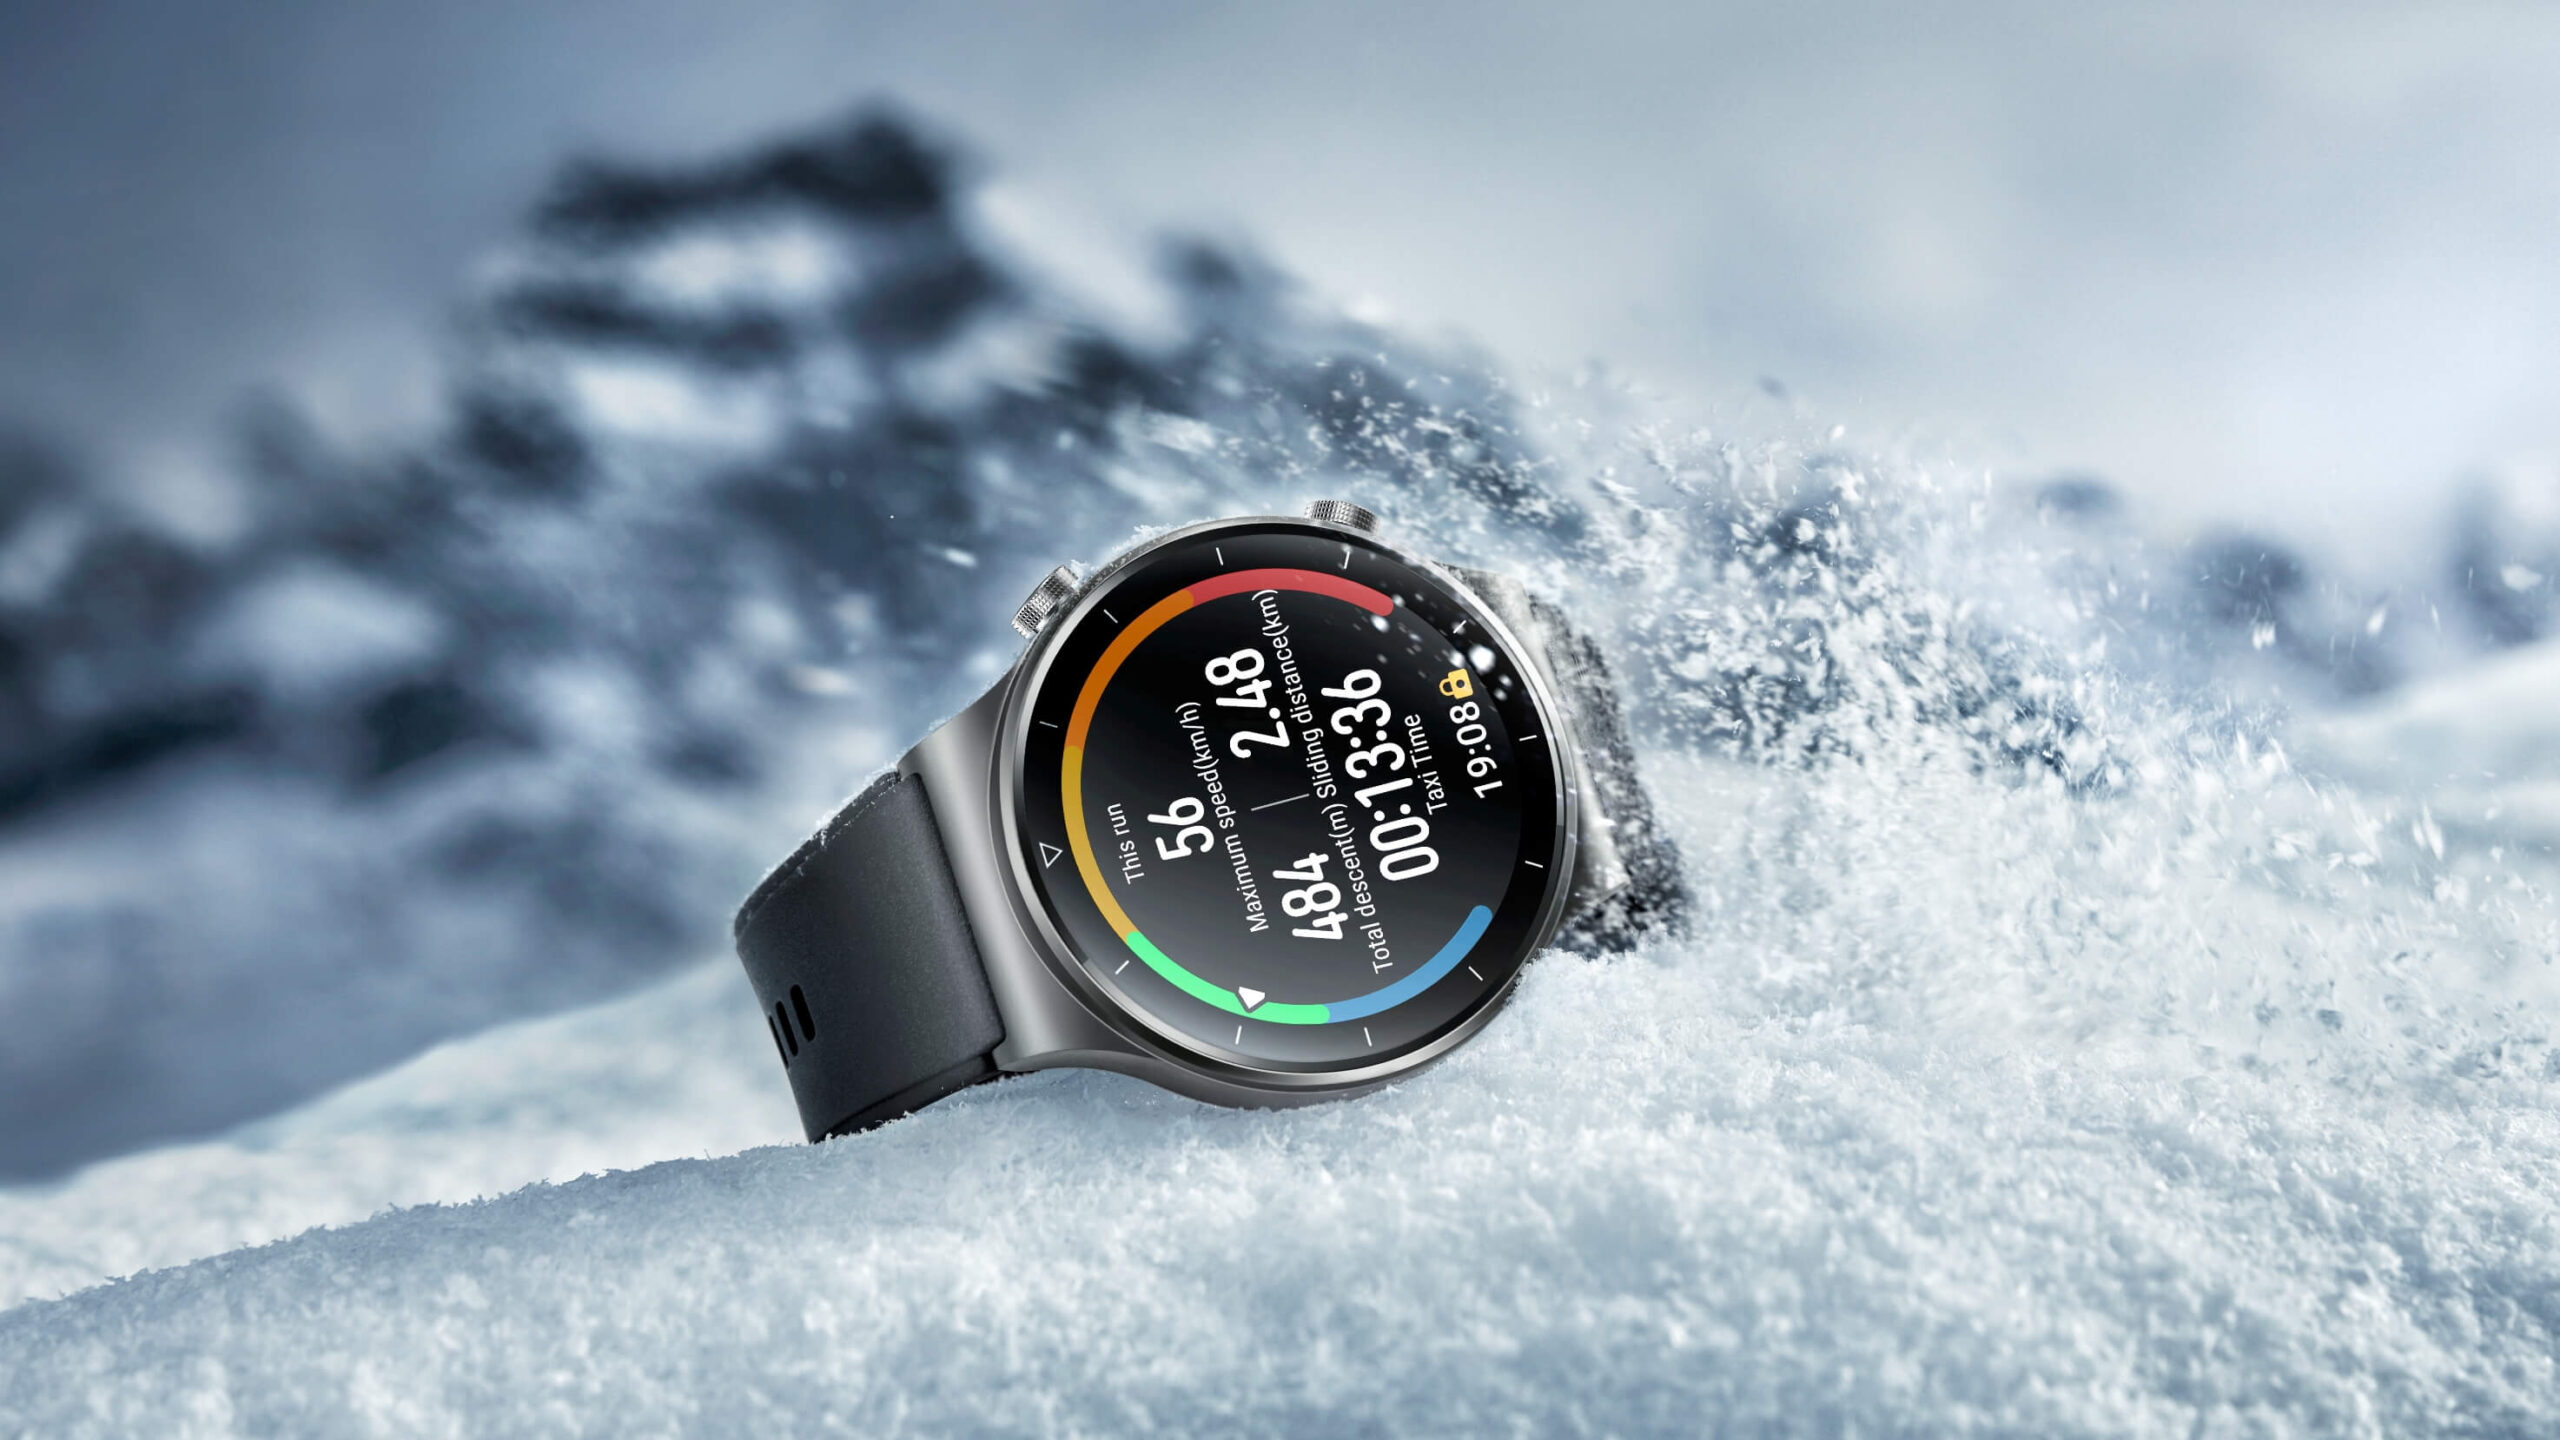 Huawei has the world’s largest market share for wrist wearable, achieved thanks to the HUAWEI WATCH GT Series